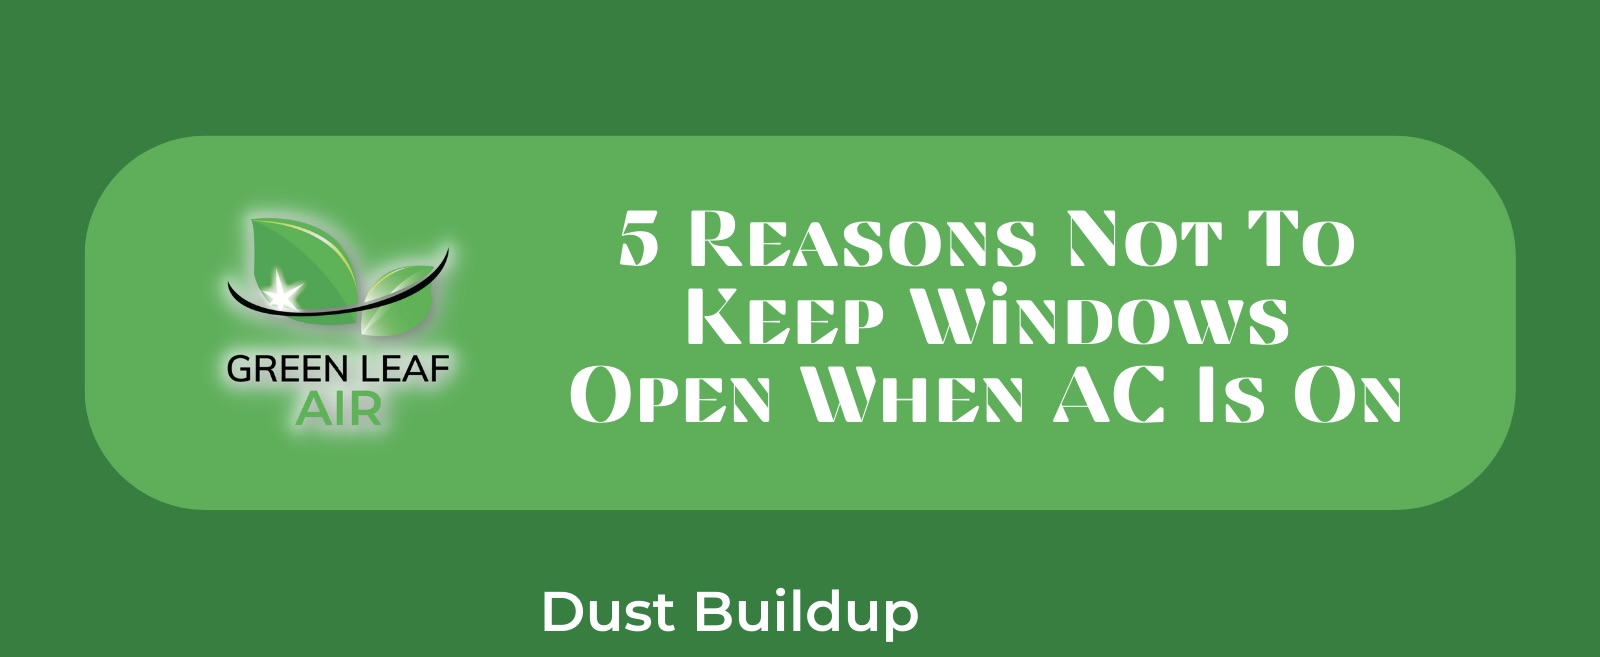 5 Reasons Not To Keep Windows Open When AC Is On